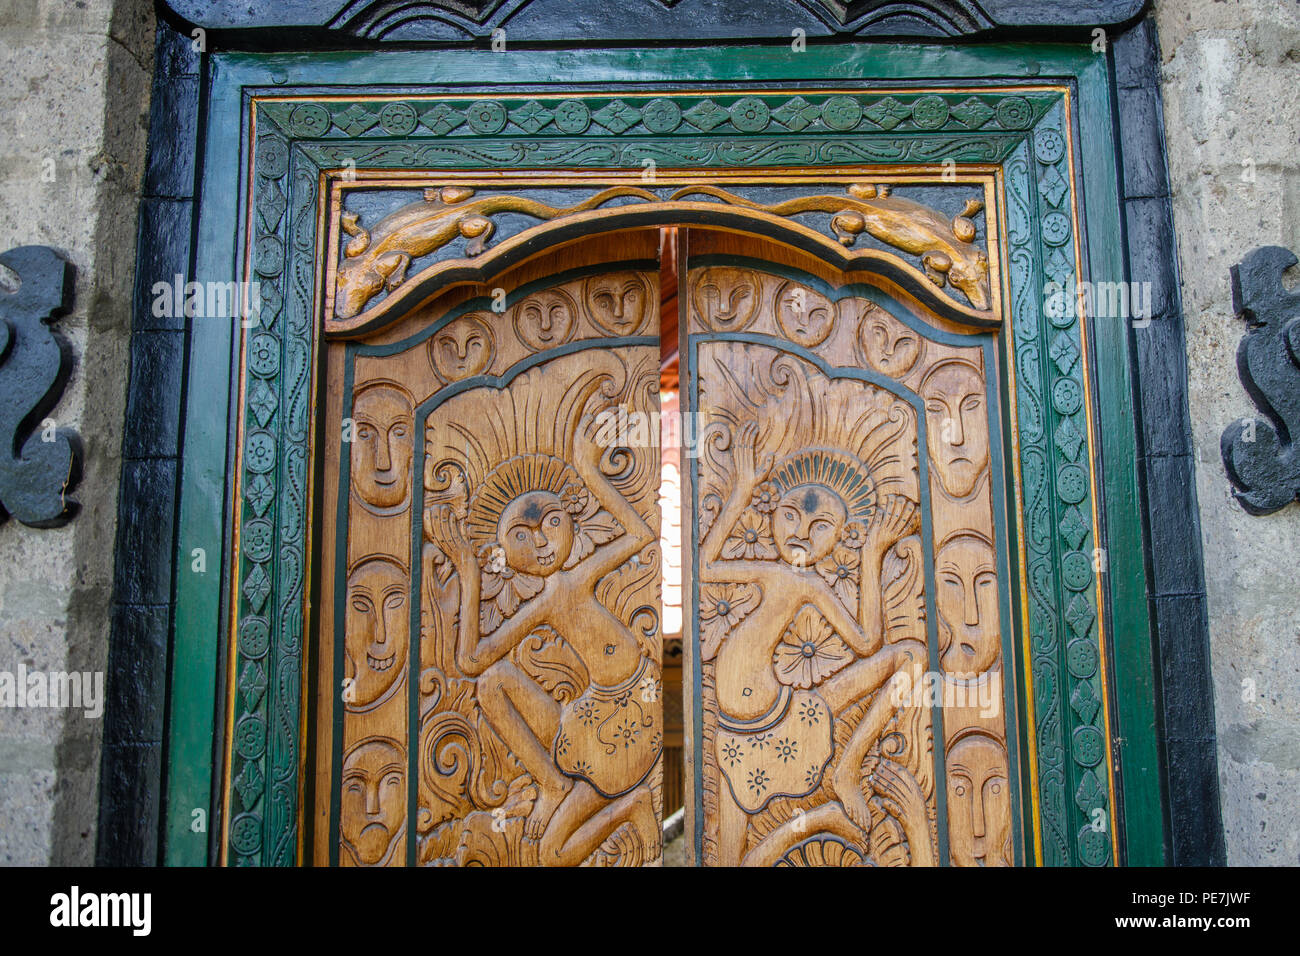 Carved wooden doors of Balinese house, Bali, Indonesia. Stock Photo